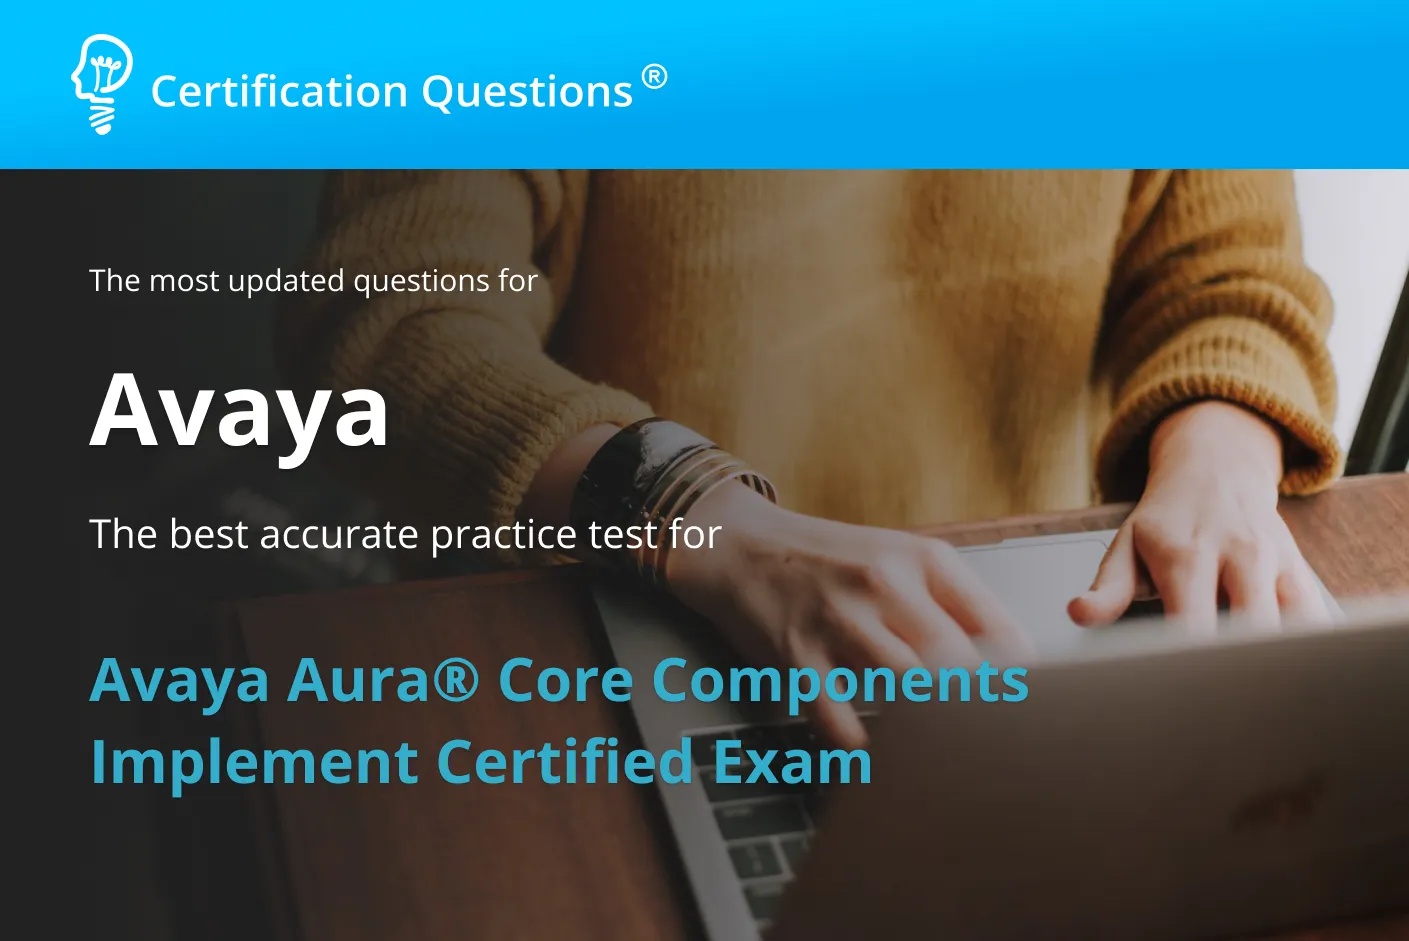 This image is related to Avaya Aura Core Components Implement Certified Exam